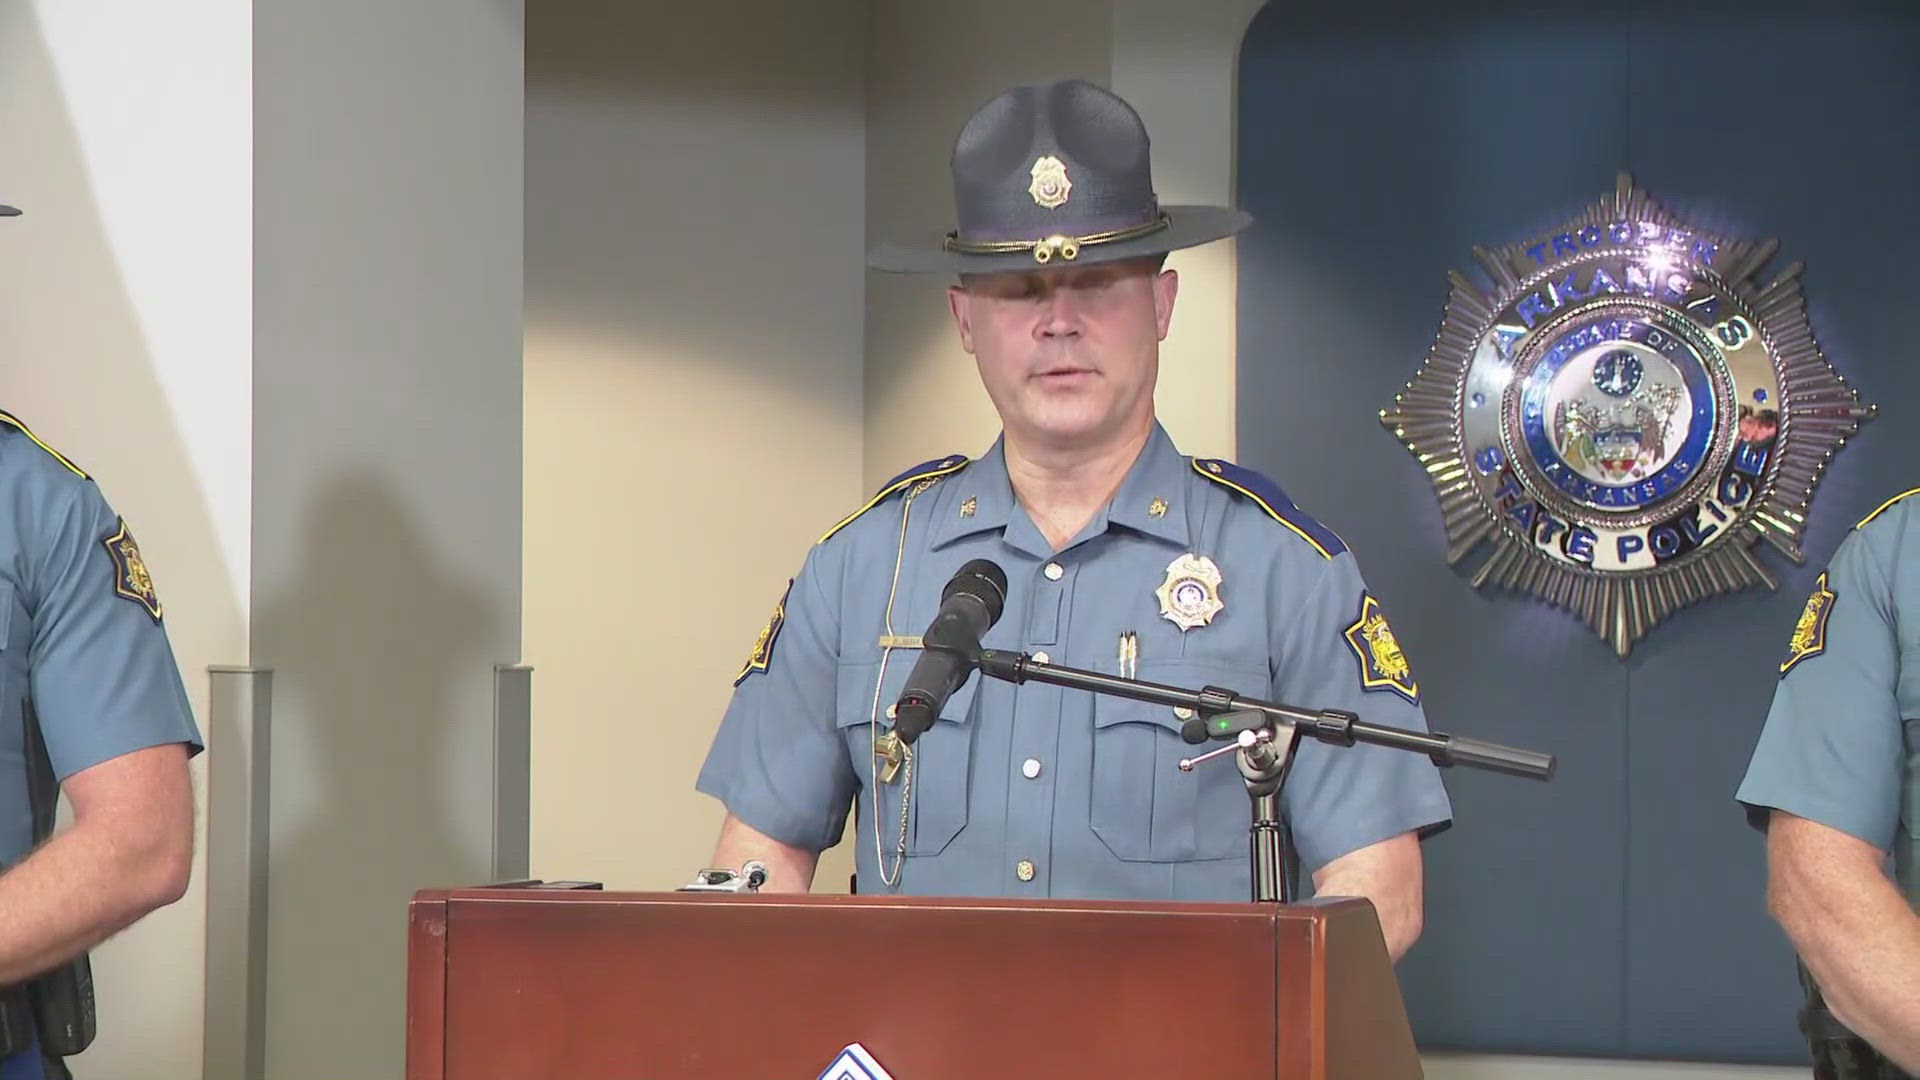 Col. Mike Hagar with Arkansas State Police said Callie Weems, a victim of the Fordyce shooting, was shot while rendering aid to another victim.